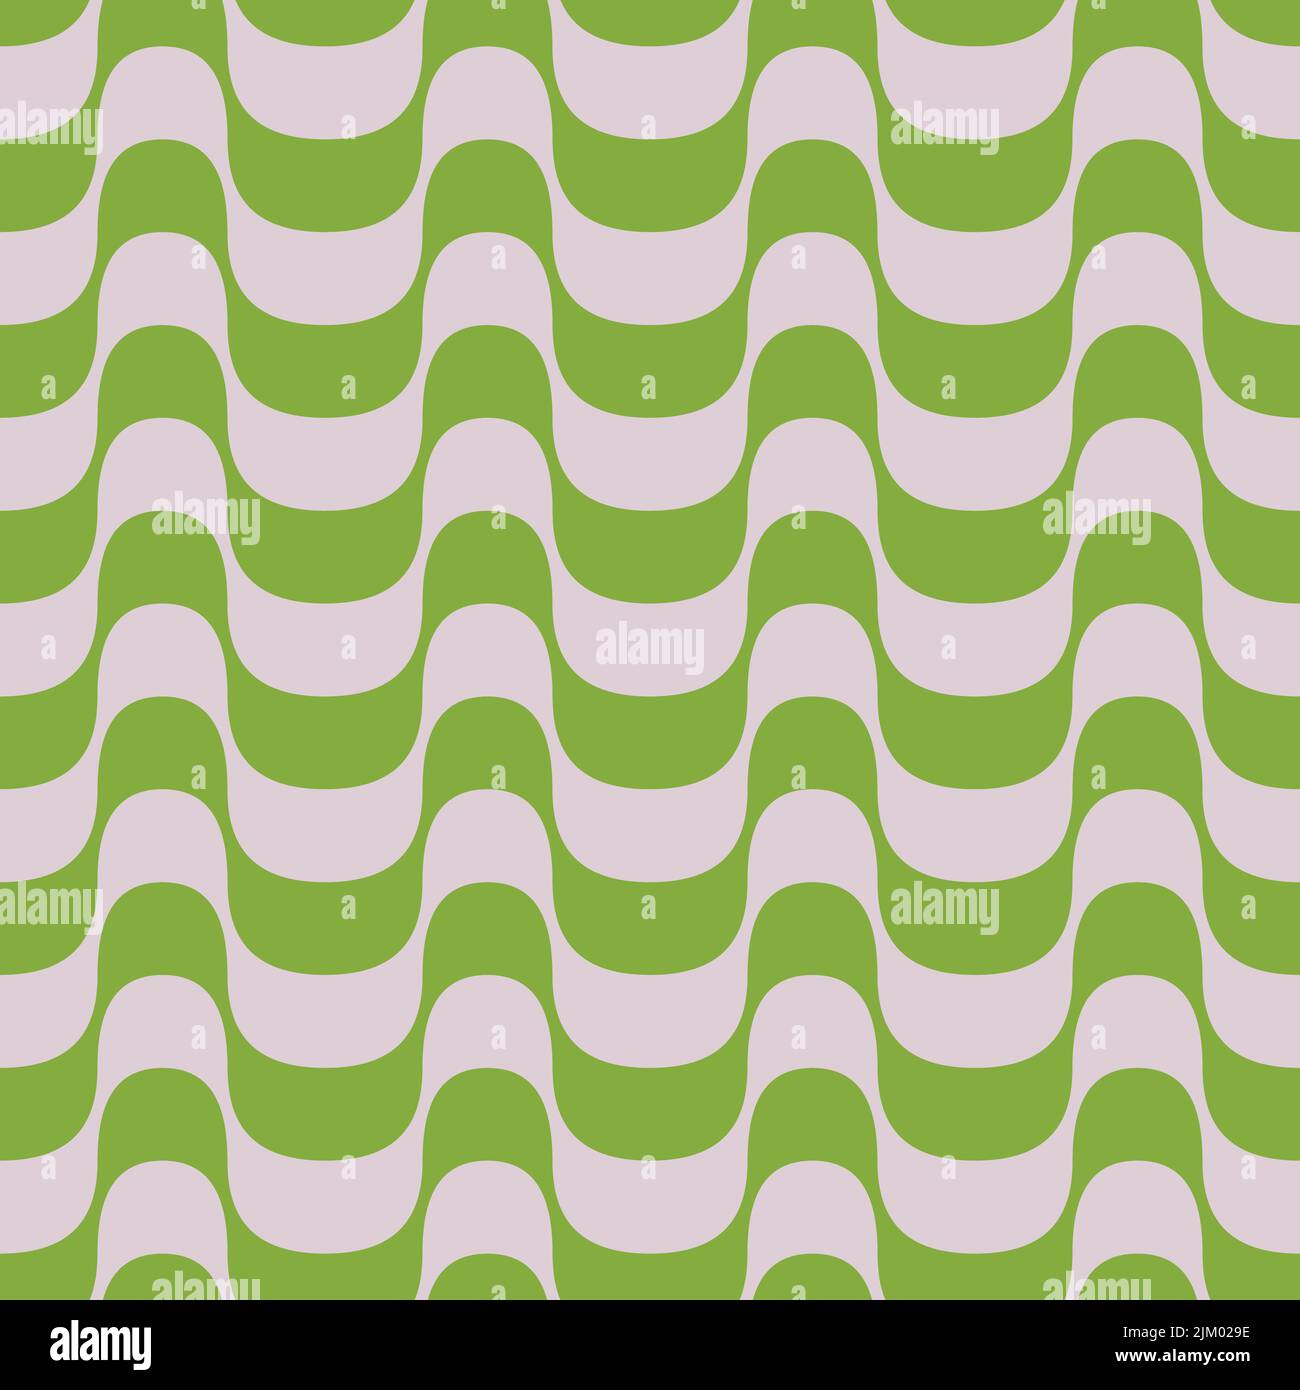 Seamless pattern. Curved wavy stripes in green and light pink colors. Vector illustration. 3D effect. Print for textile, fabric, poster, home decor Stock Vector